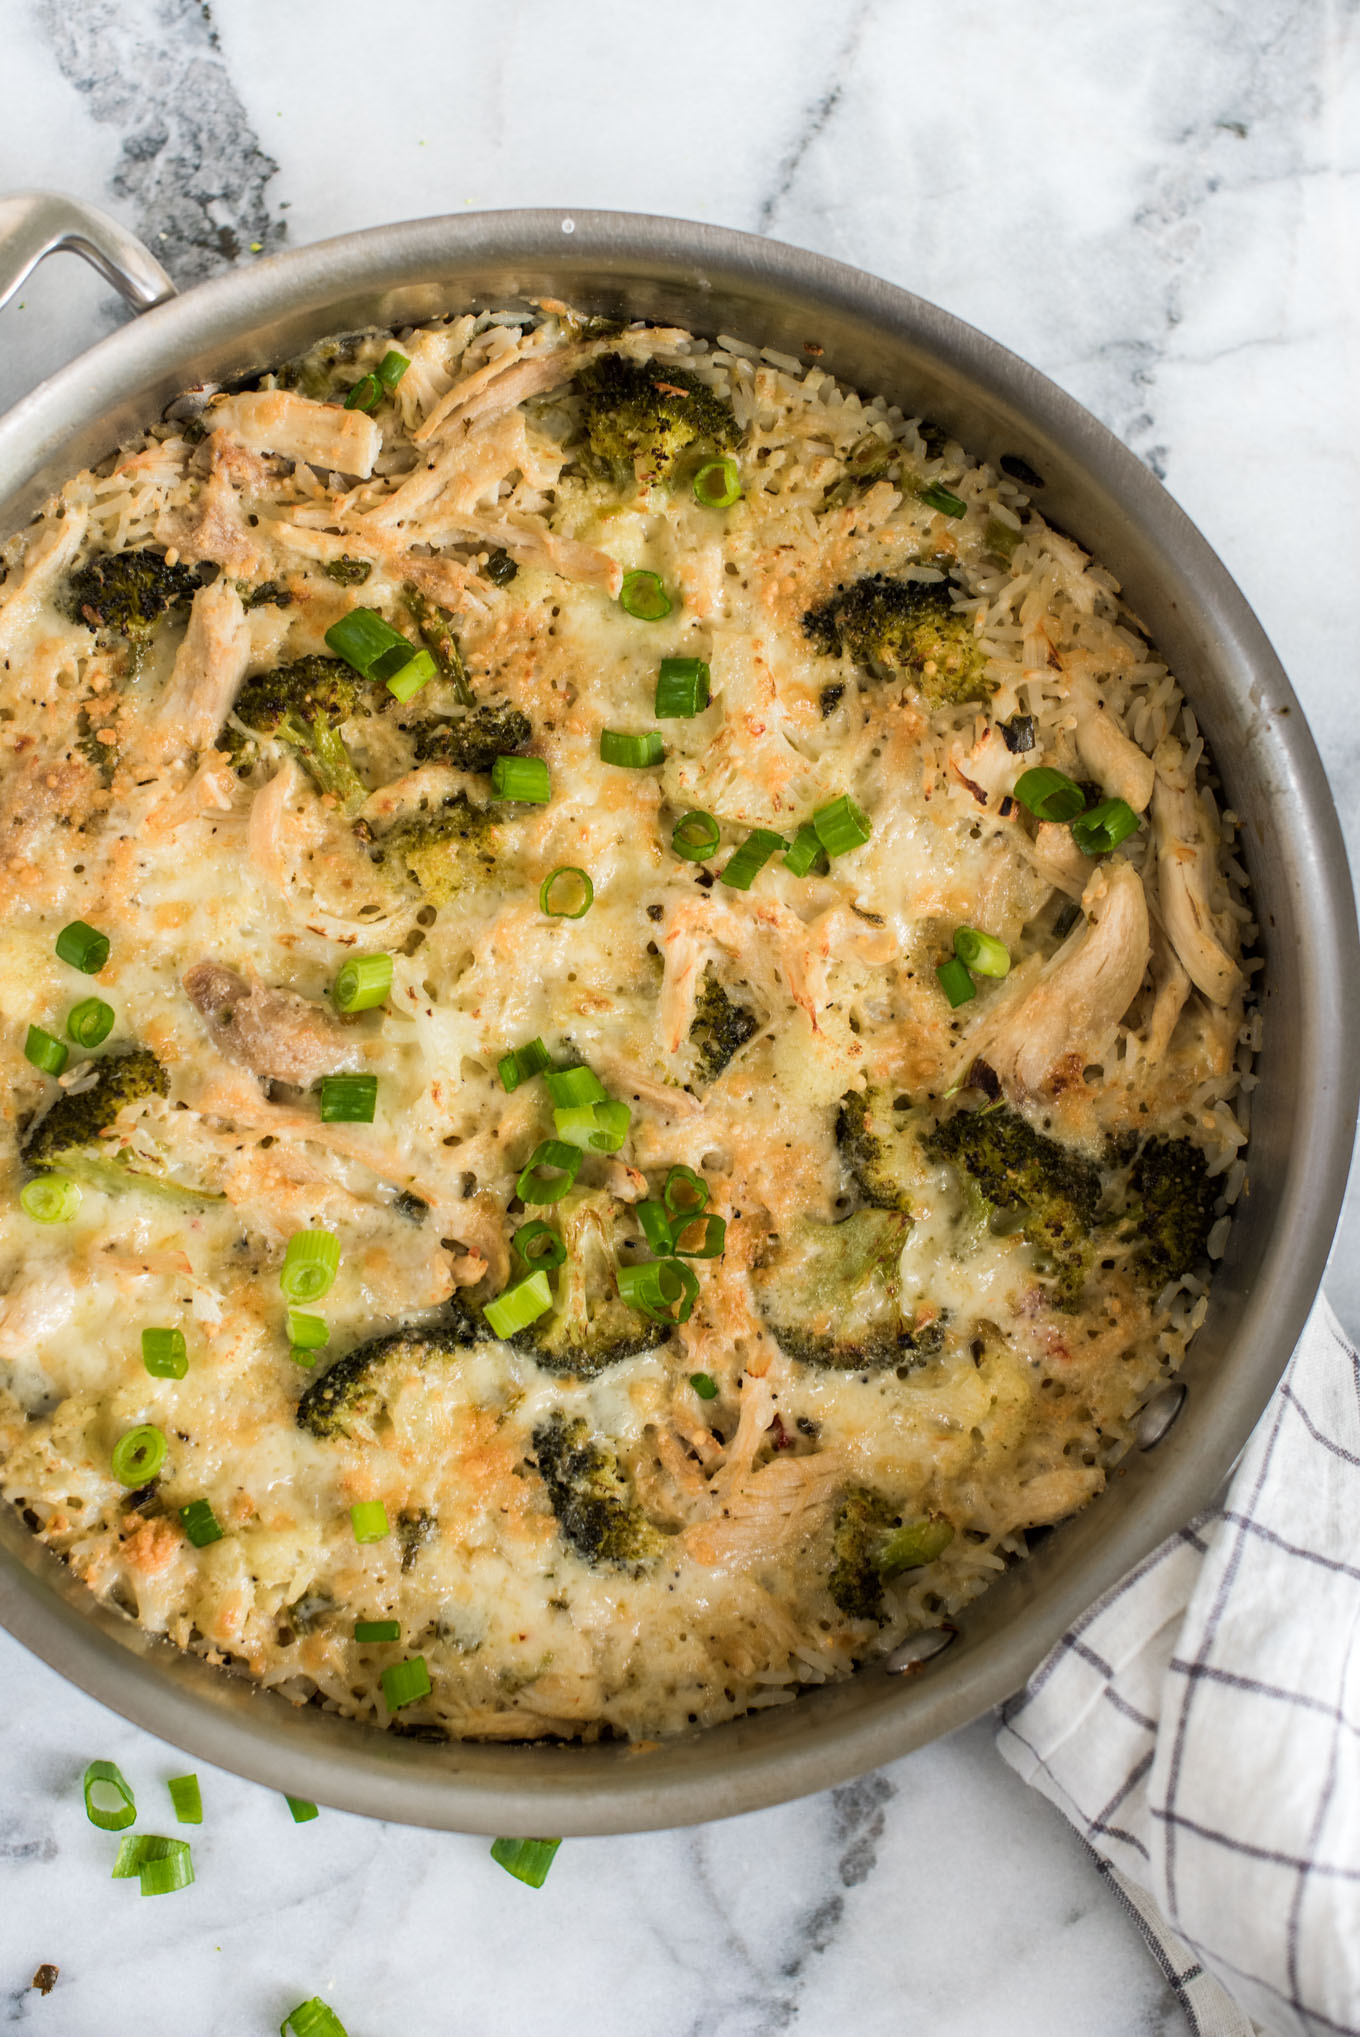 Skillet of chicken and rice